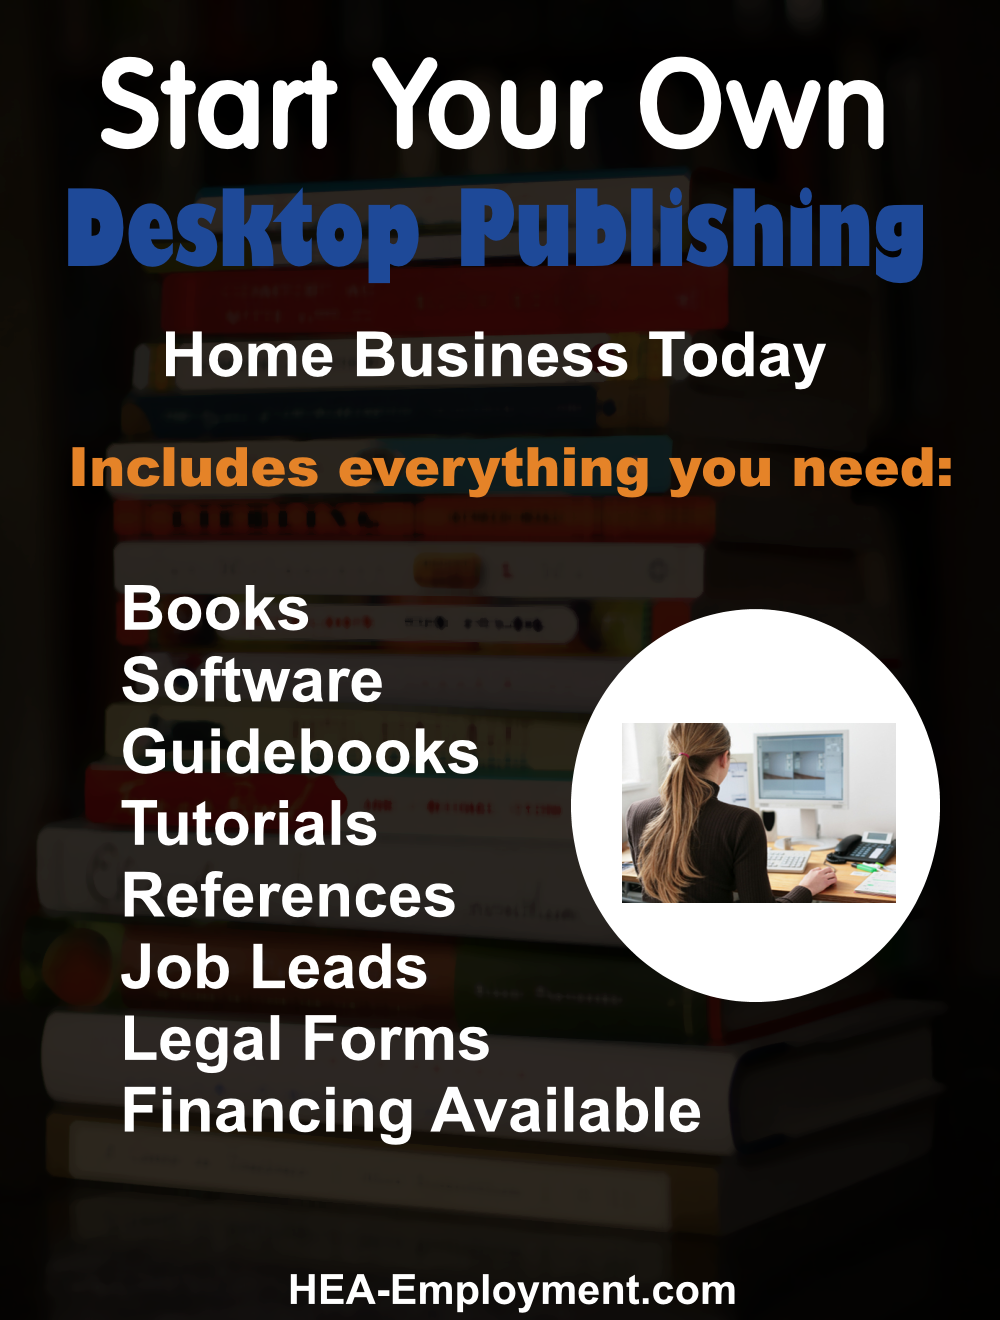 Start your own desktop publishing legitimate home based business. Fully equipped home business package with everything you need to get started. Productivity software, tutorials, guidebooks, references, manuals, tax advice and legal forms are included with each kit. Be your own boss!